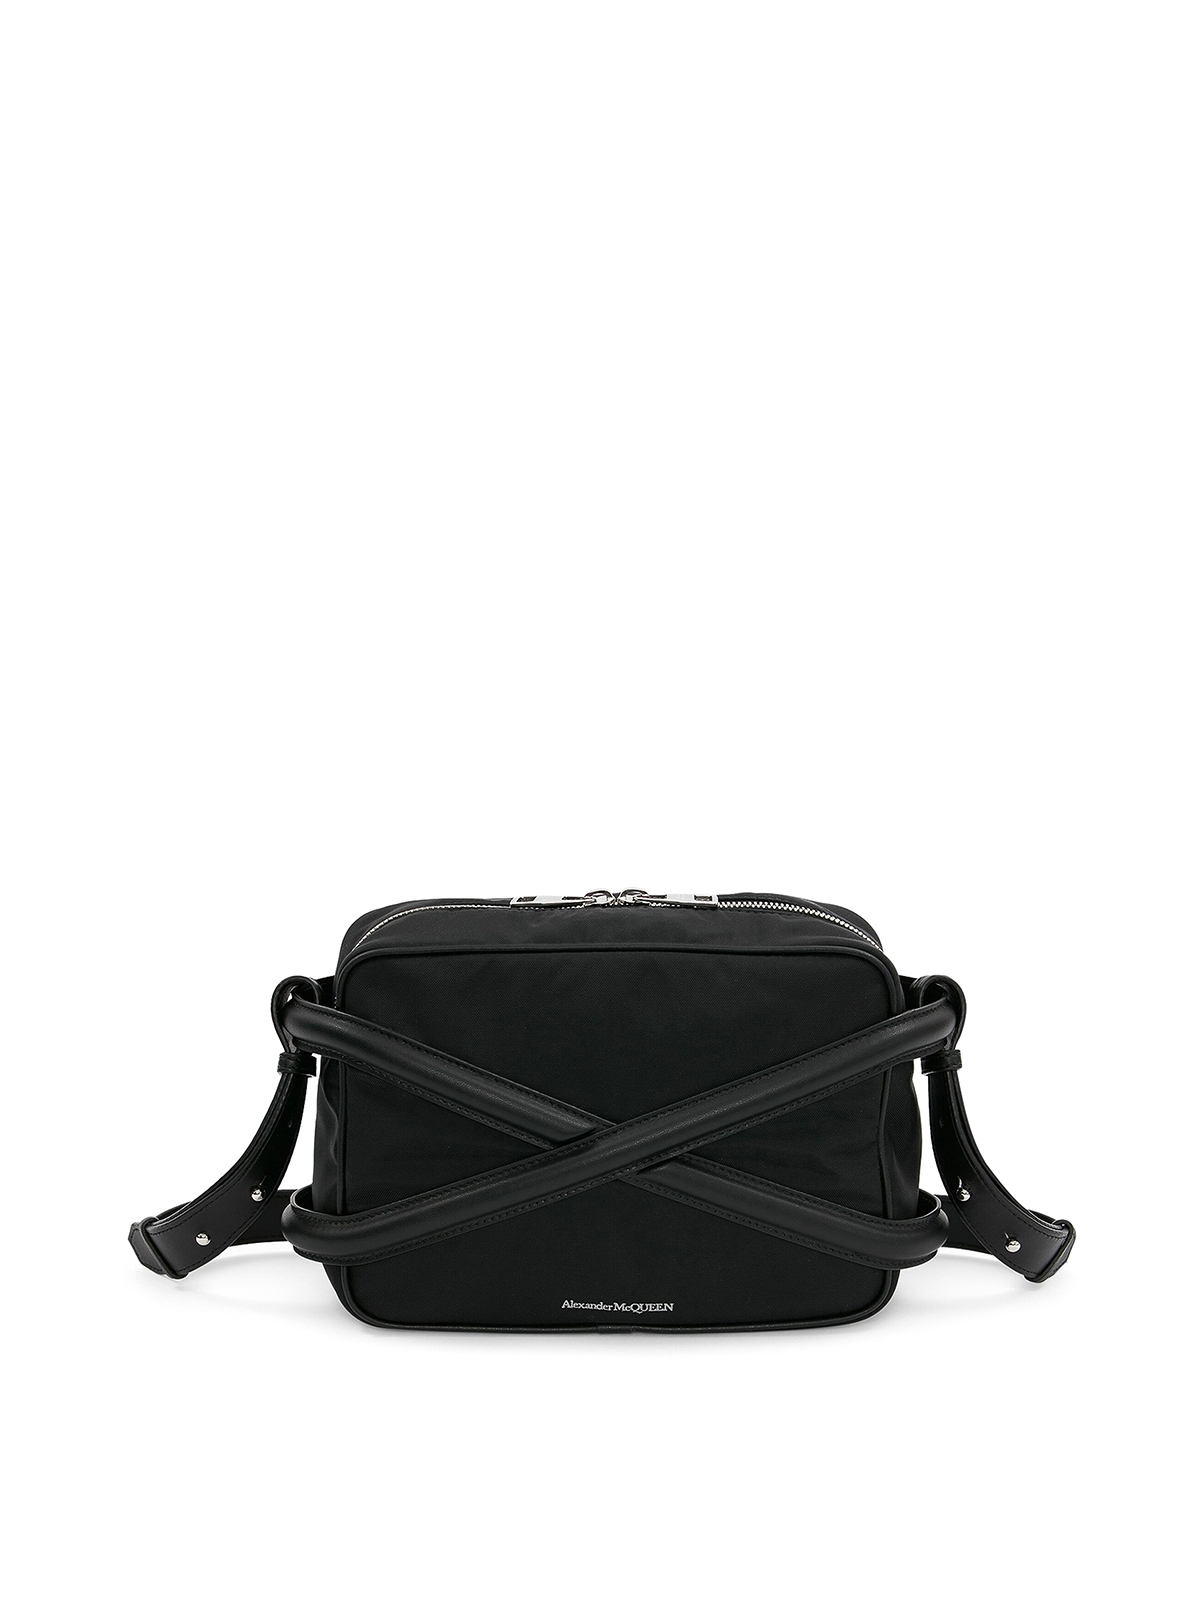 Alexander Mcqueen Small Bag With Front Crossover In Black